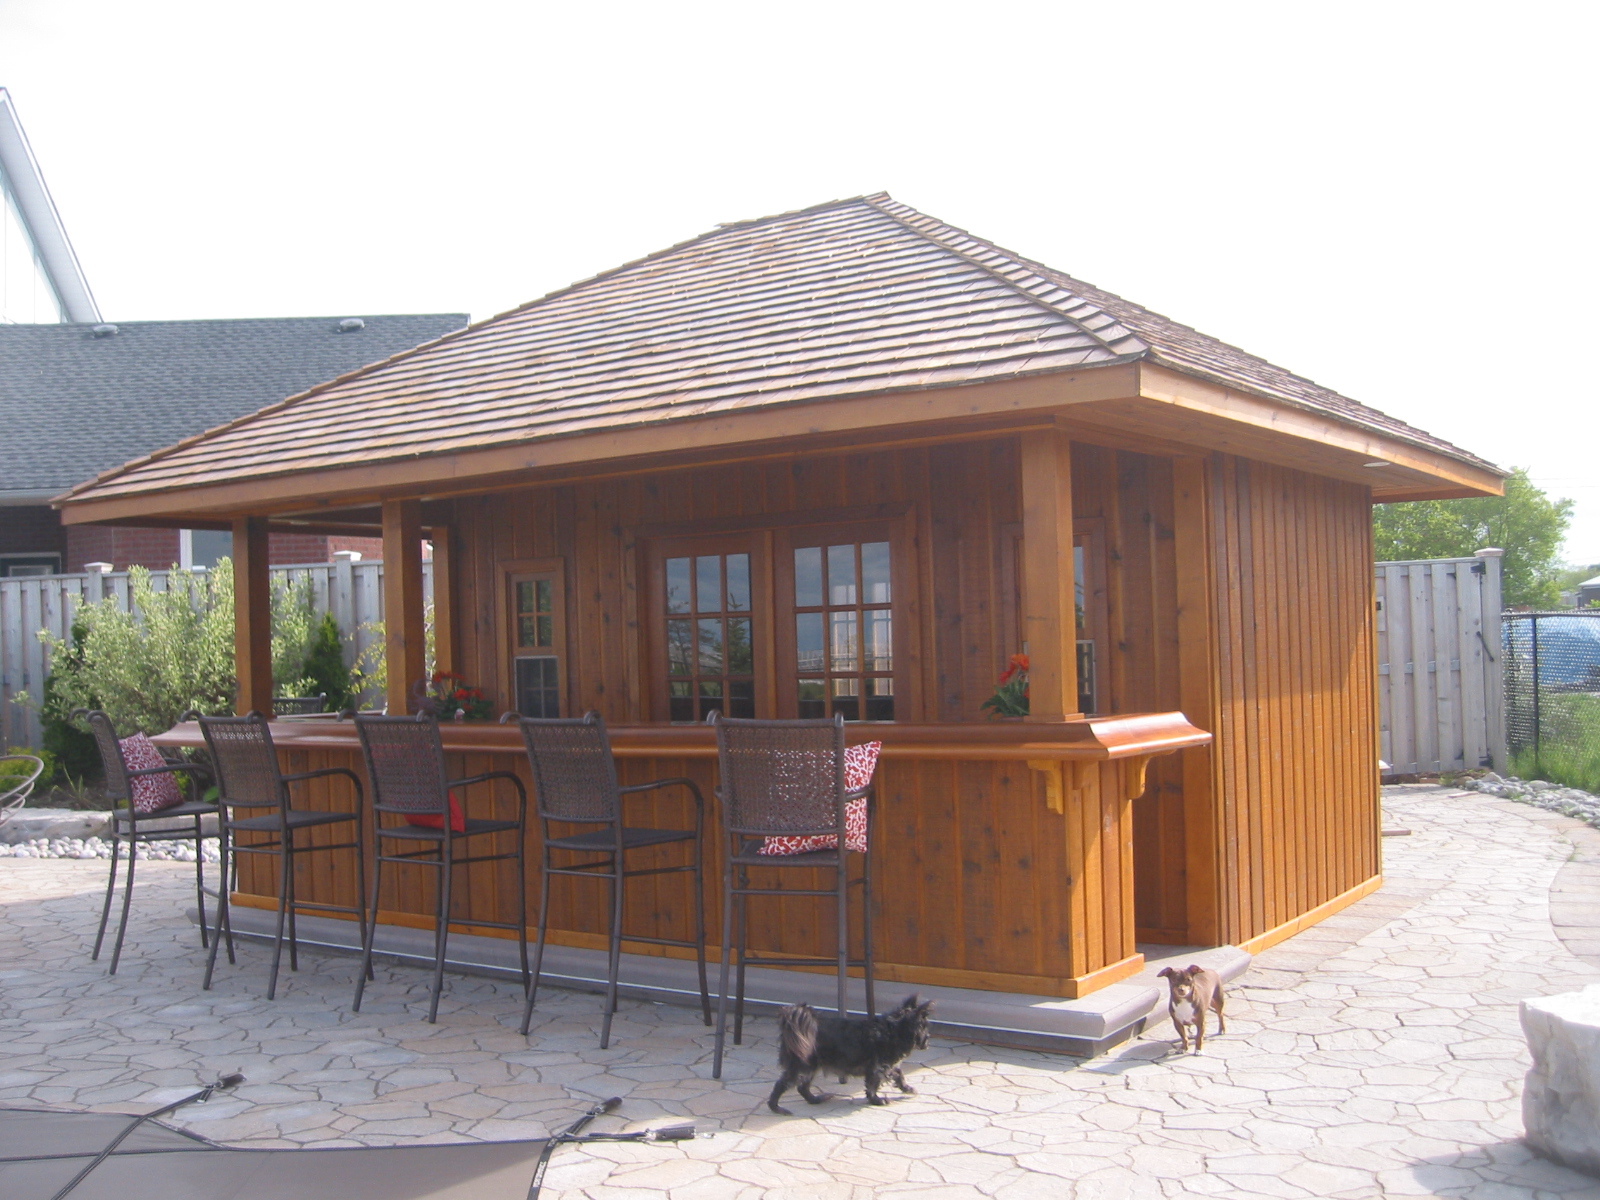 Cedar barside pool cabana 13x16 with double casement windows in Grimsby Ontario. ID number 100816-4.